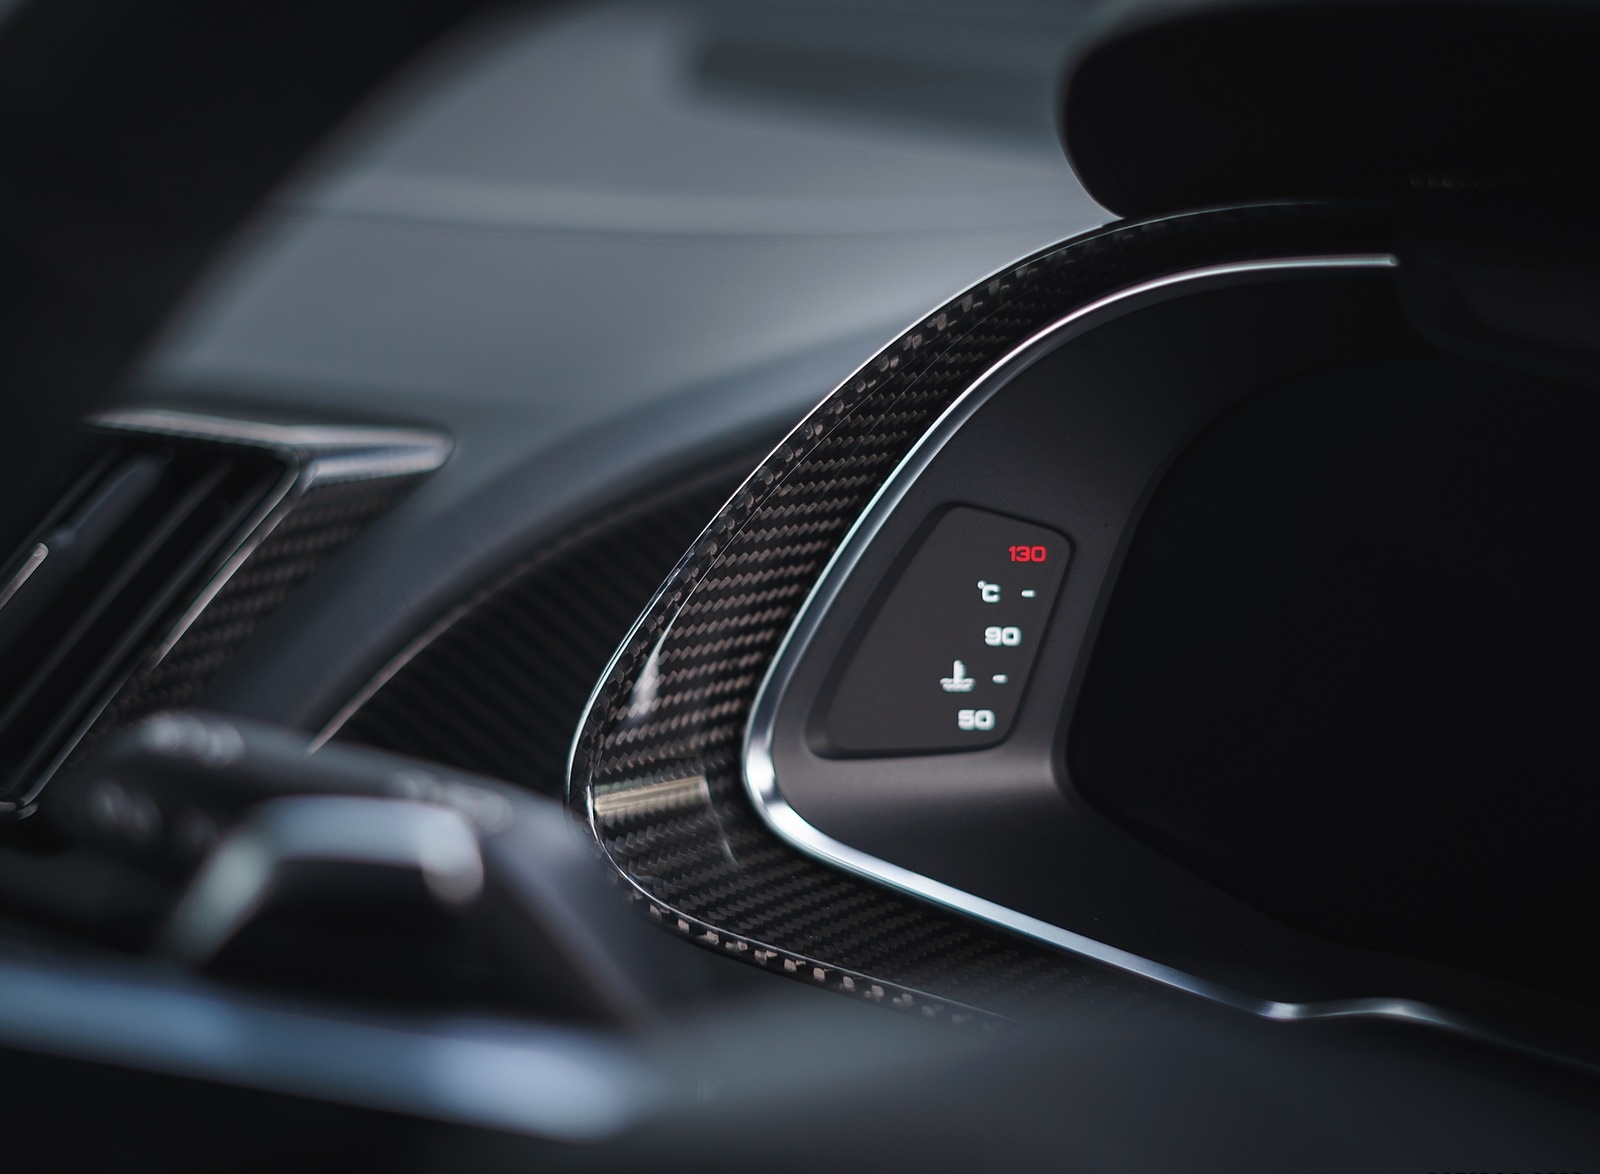 2019 Audi R8 V10 Coupe Performance quattro (UK-Spec) Interior Detail Wallpapers #190 of 199